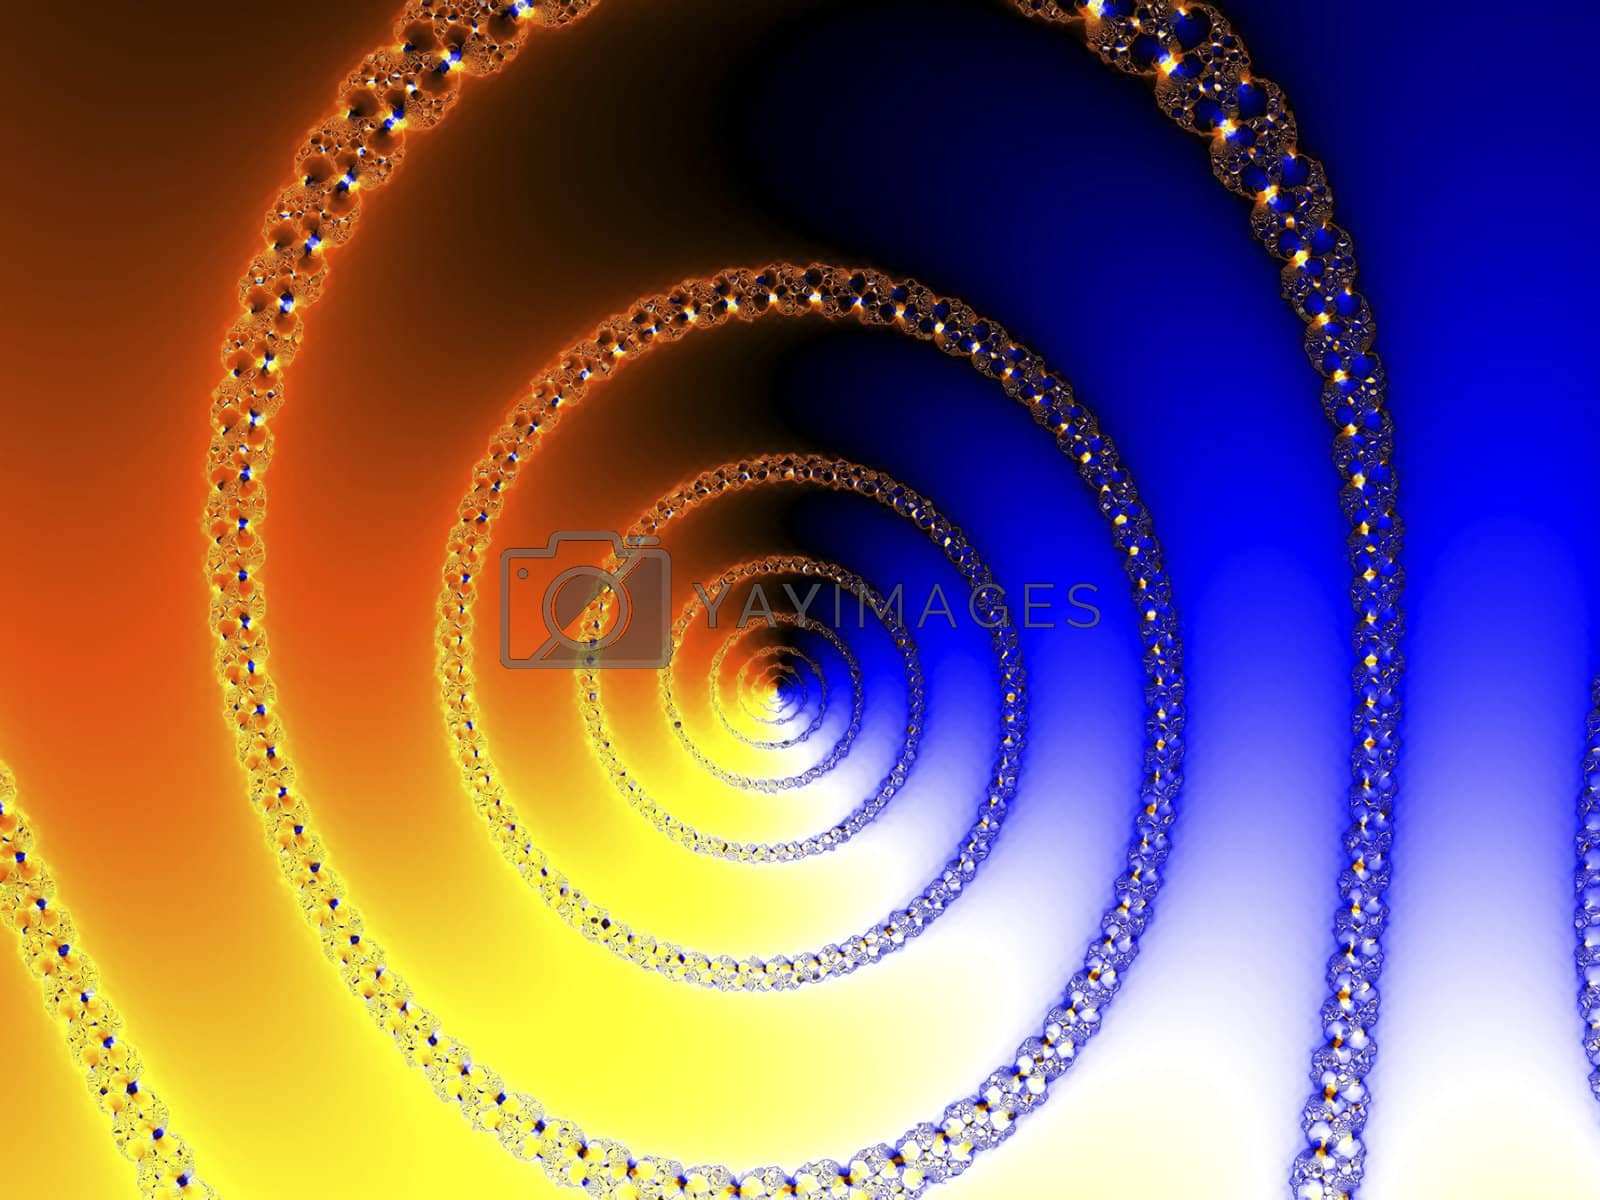 Royalty free image of fractal by 3quarks